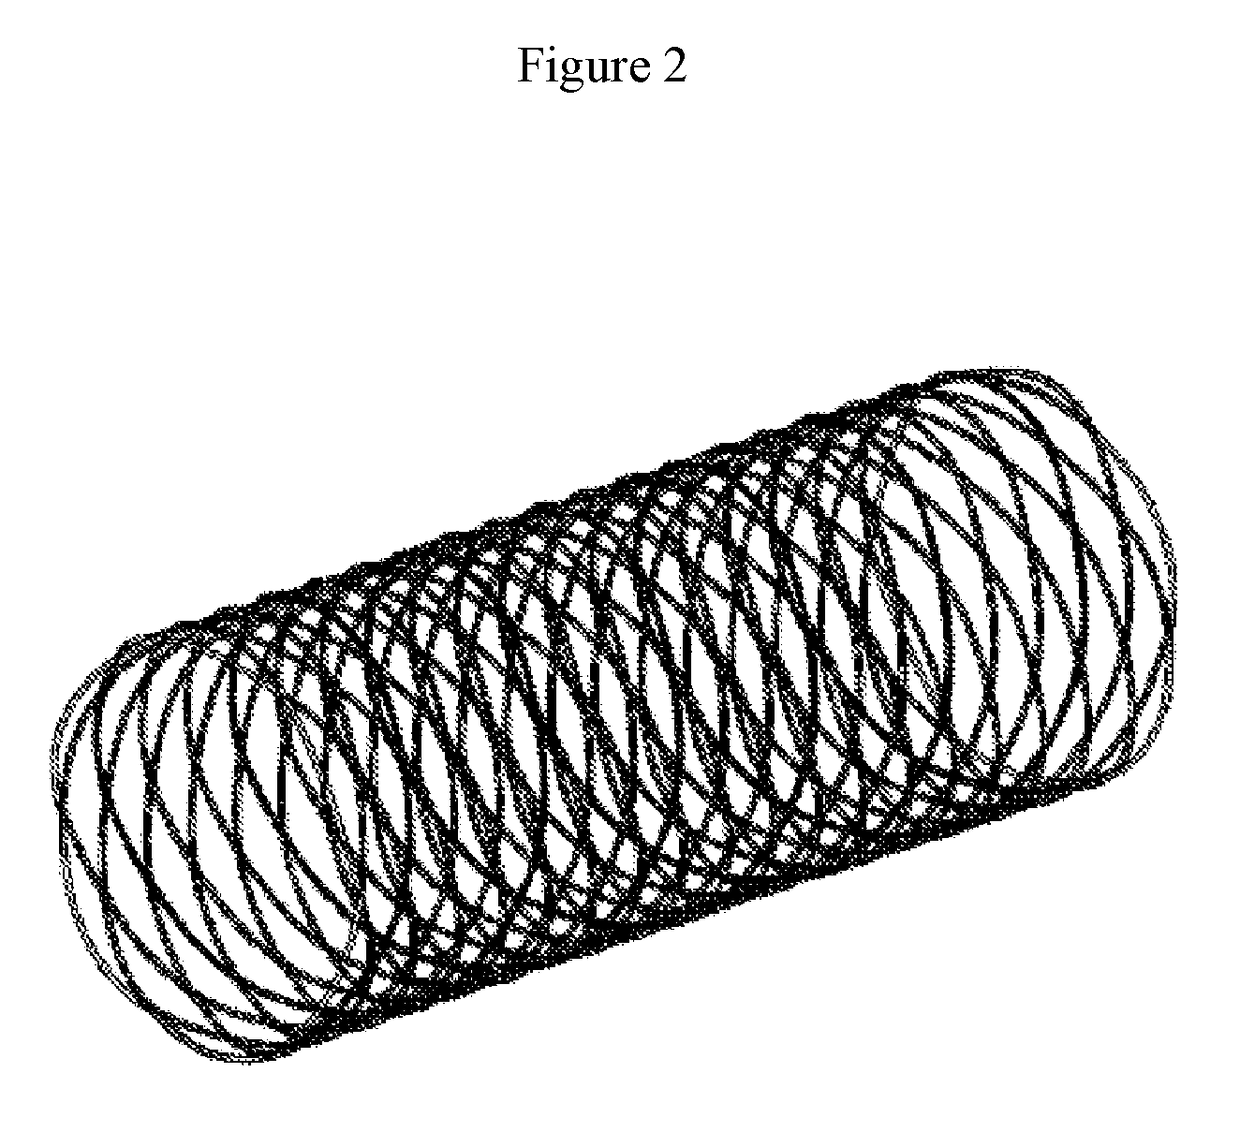 Highly retractable intravascular stent conveying system